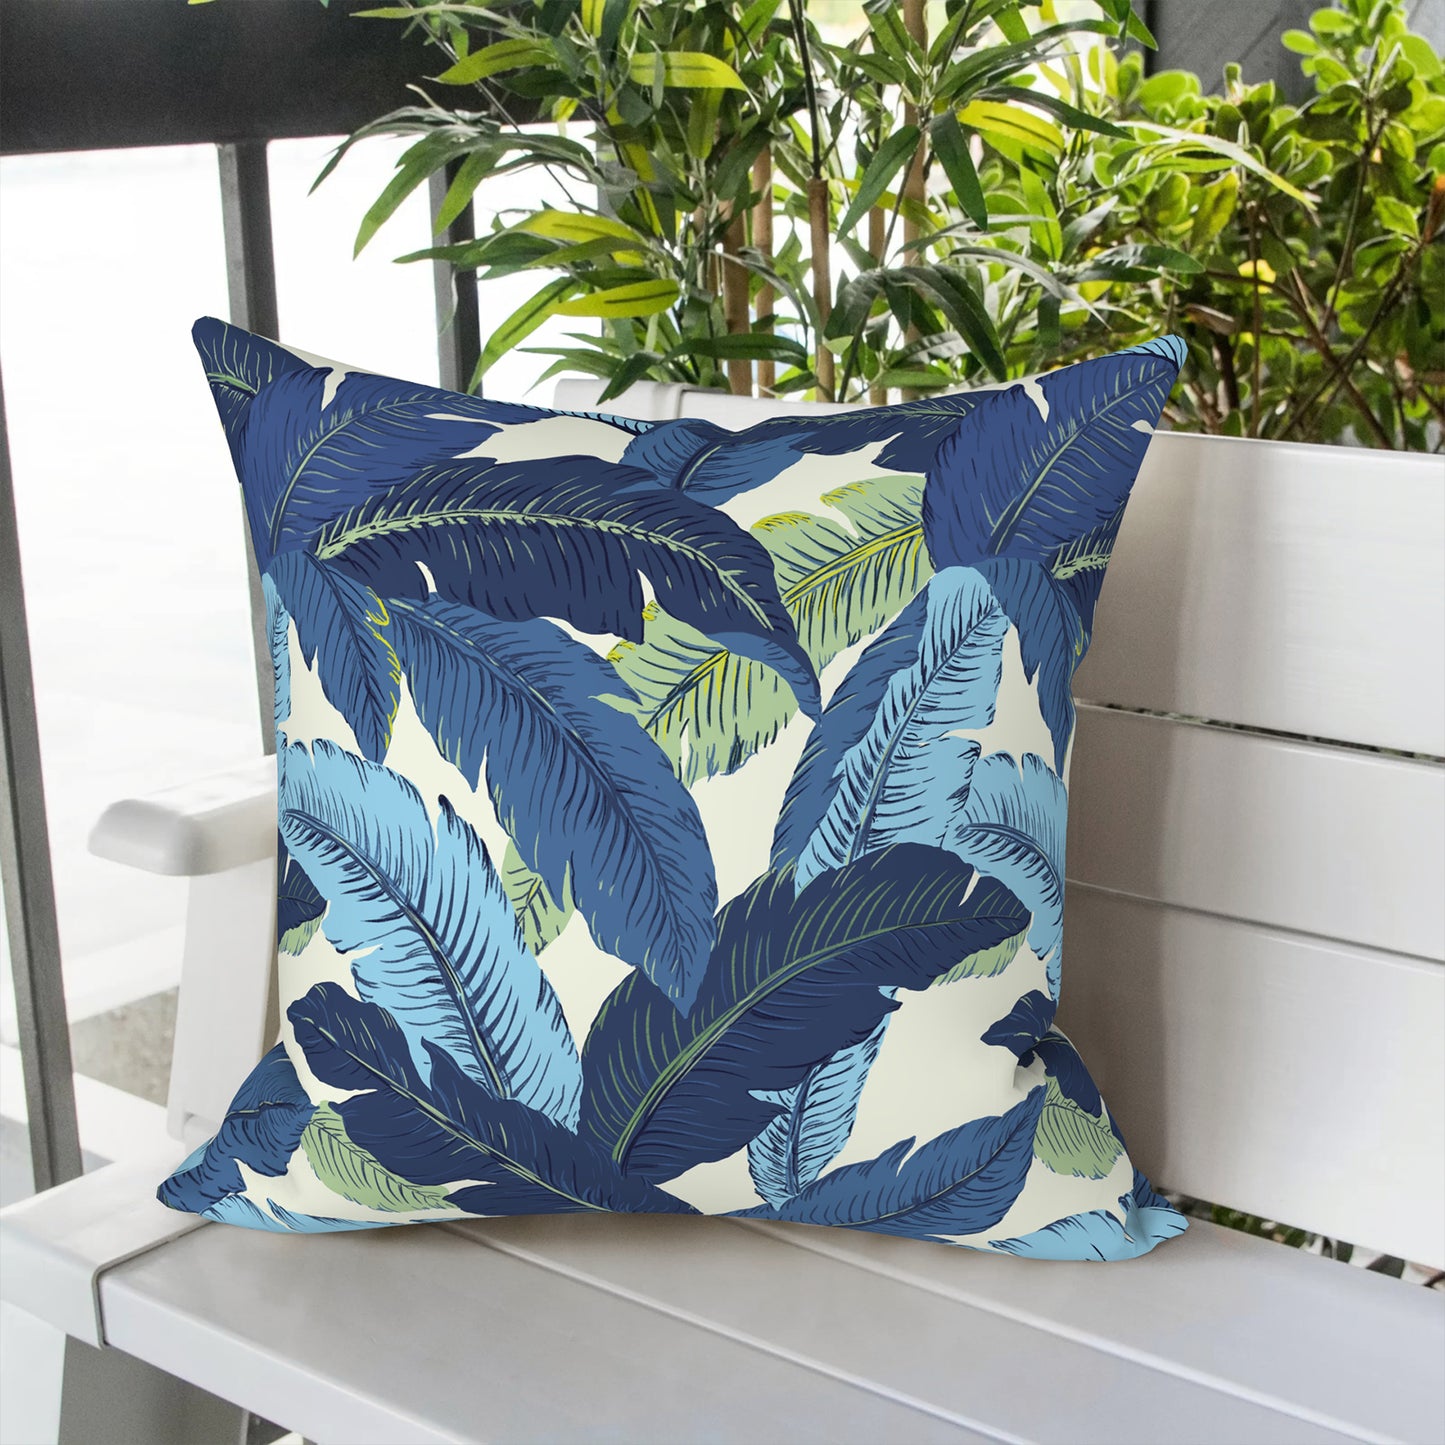 Melody Elephant Patio Throw Pillows with Inners, Fade Resistant Square Pillow Pack of 2, Decorative Garden Cushions for Home, 18x18 Inch, Swaying Palms Blue